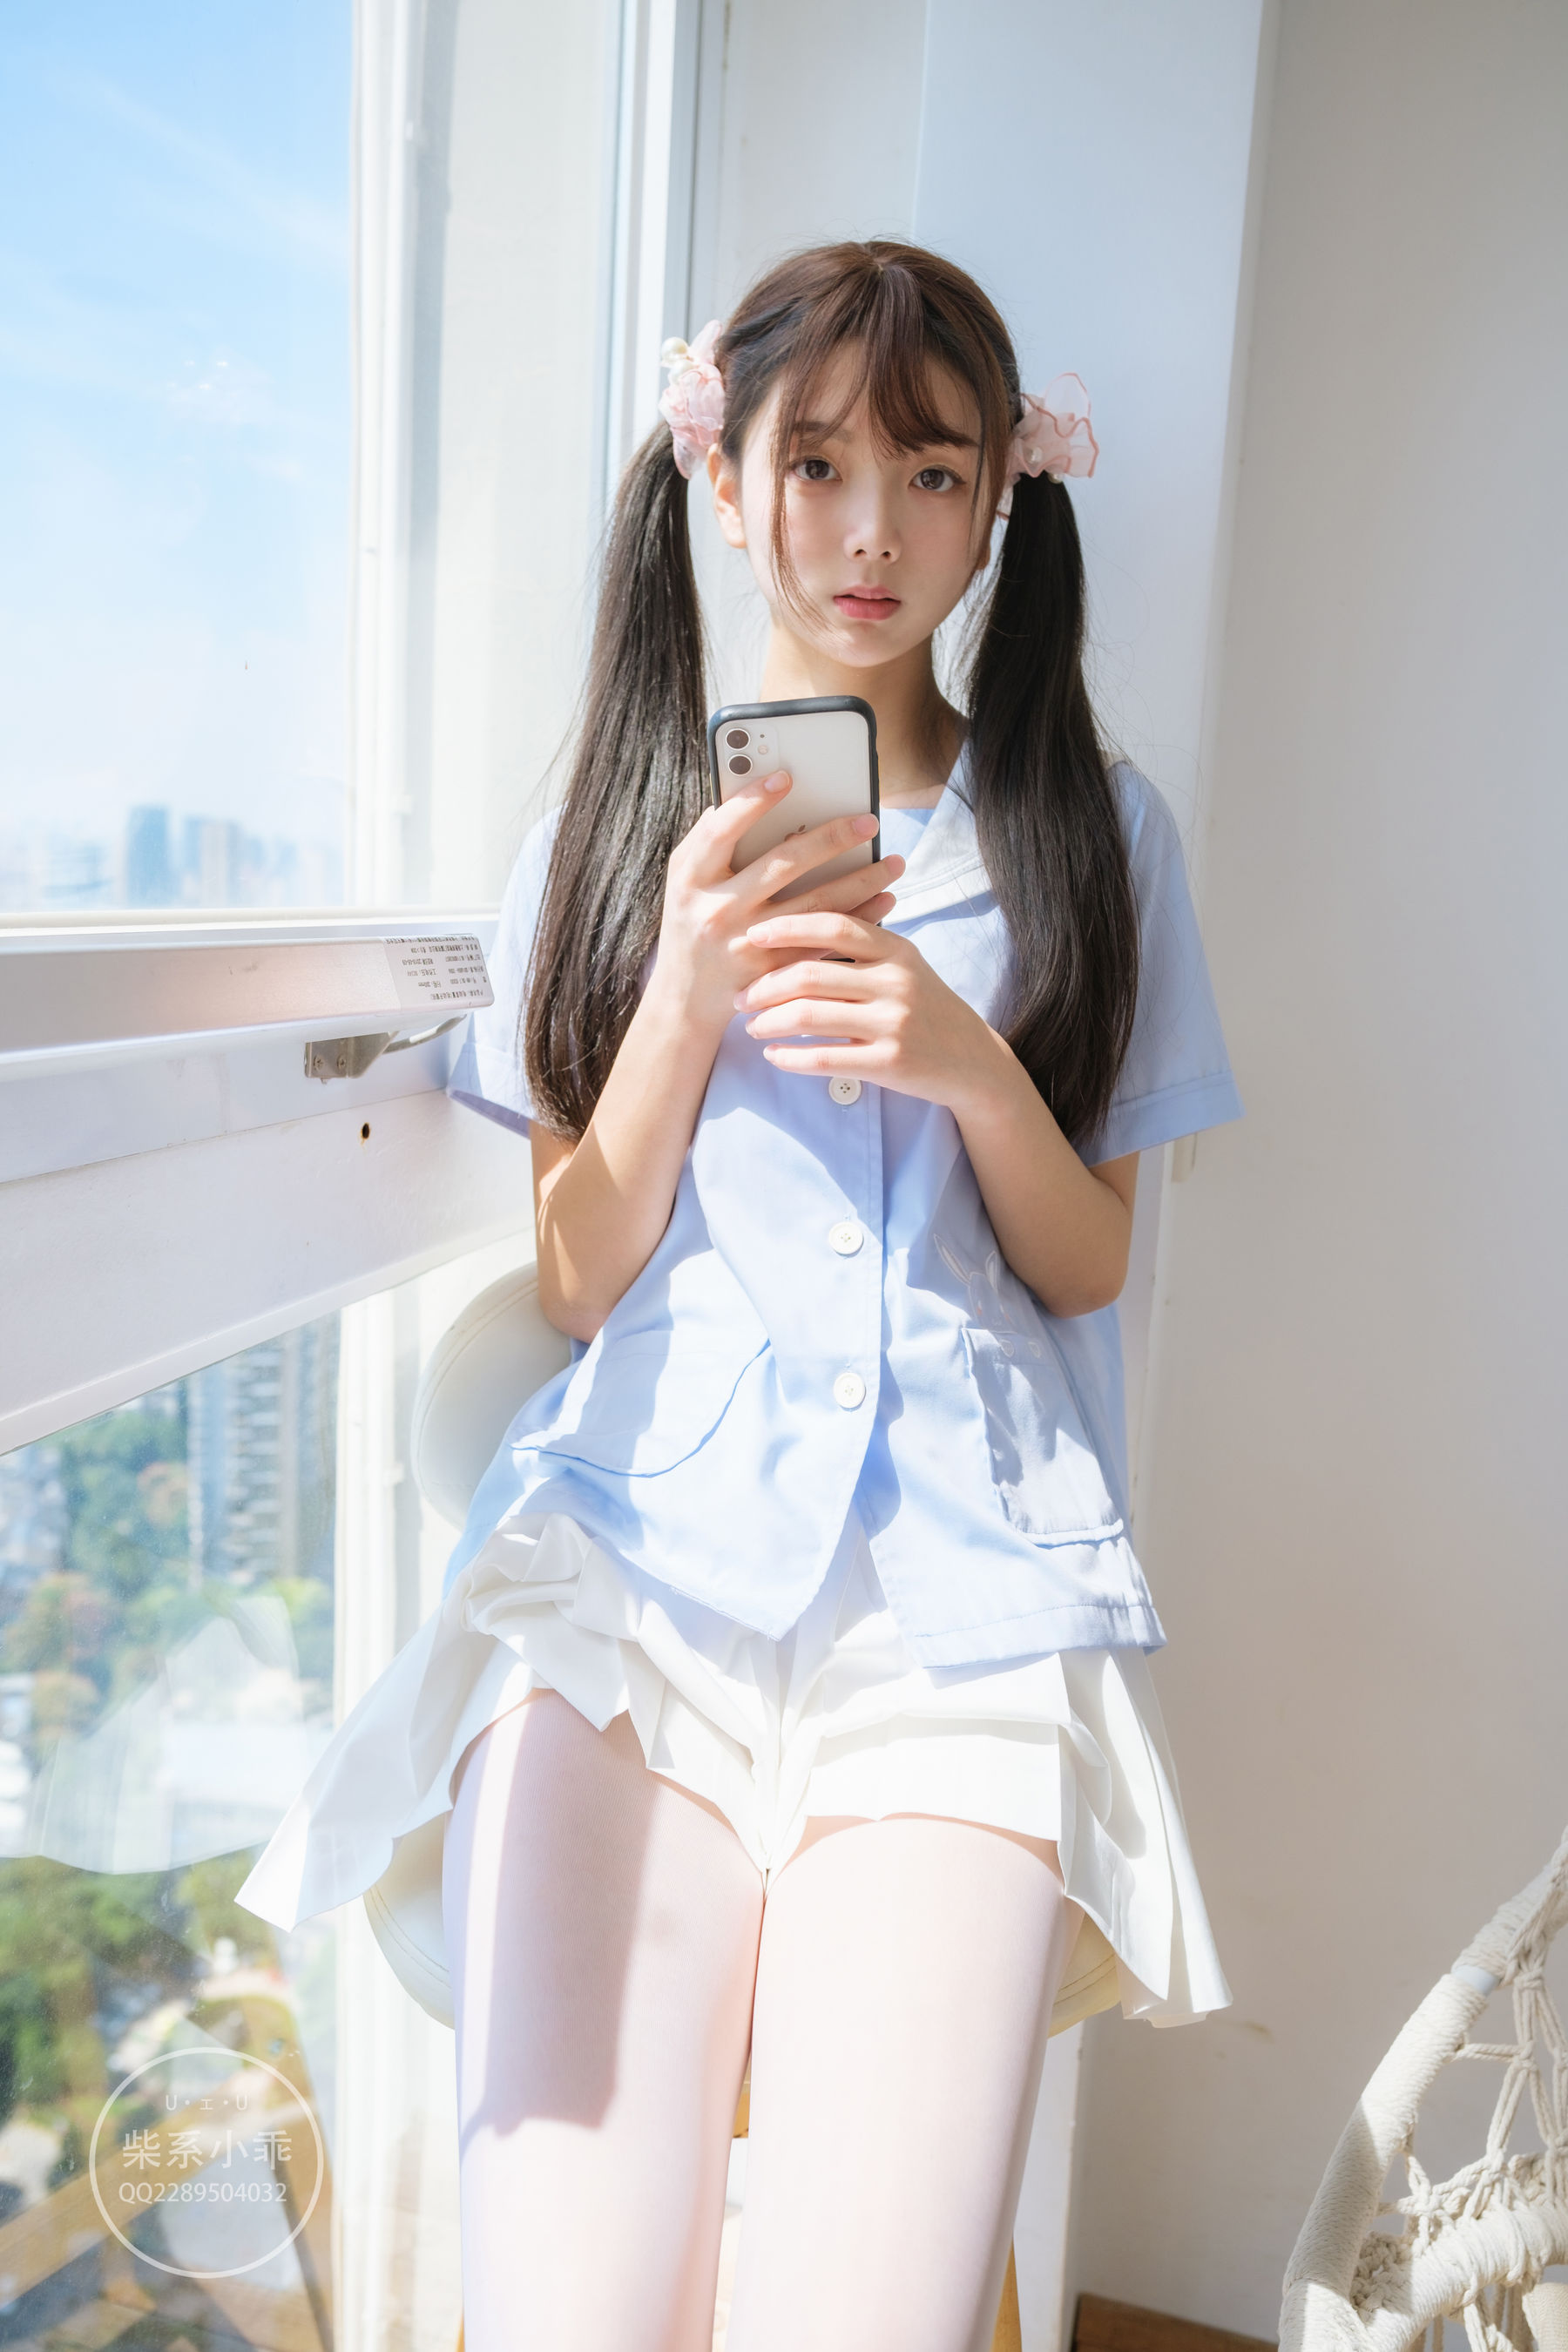 [Welfare COS] Chai Xiaojiao (Children's Album) - Clear Sky, White Silk and Double Ponytails Page 66 No.89dffe